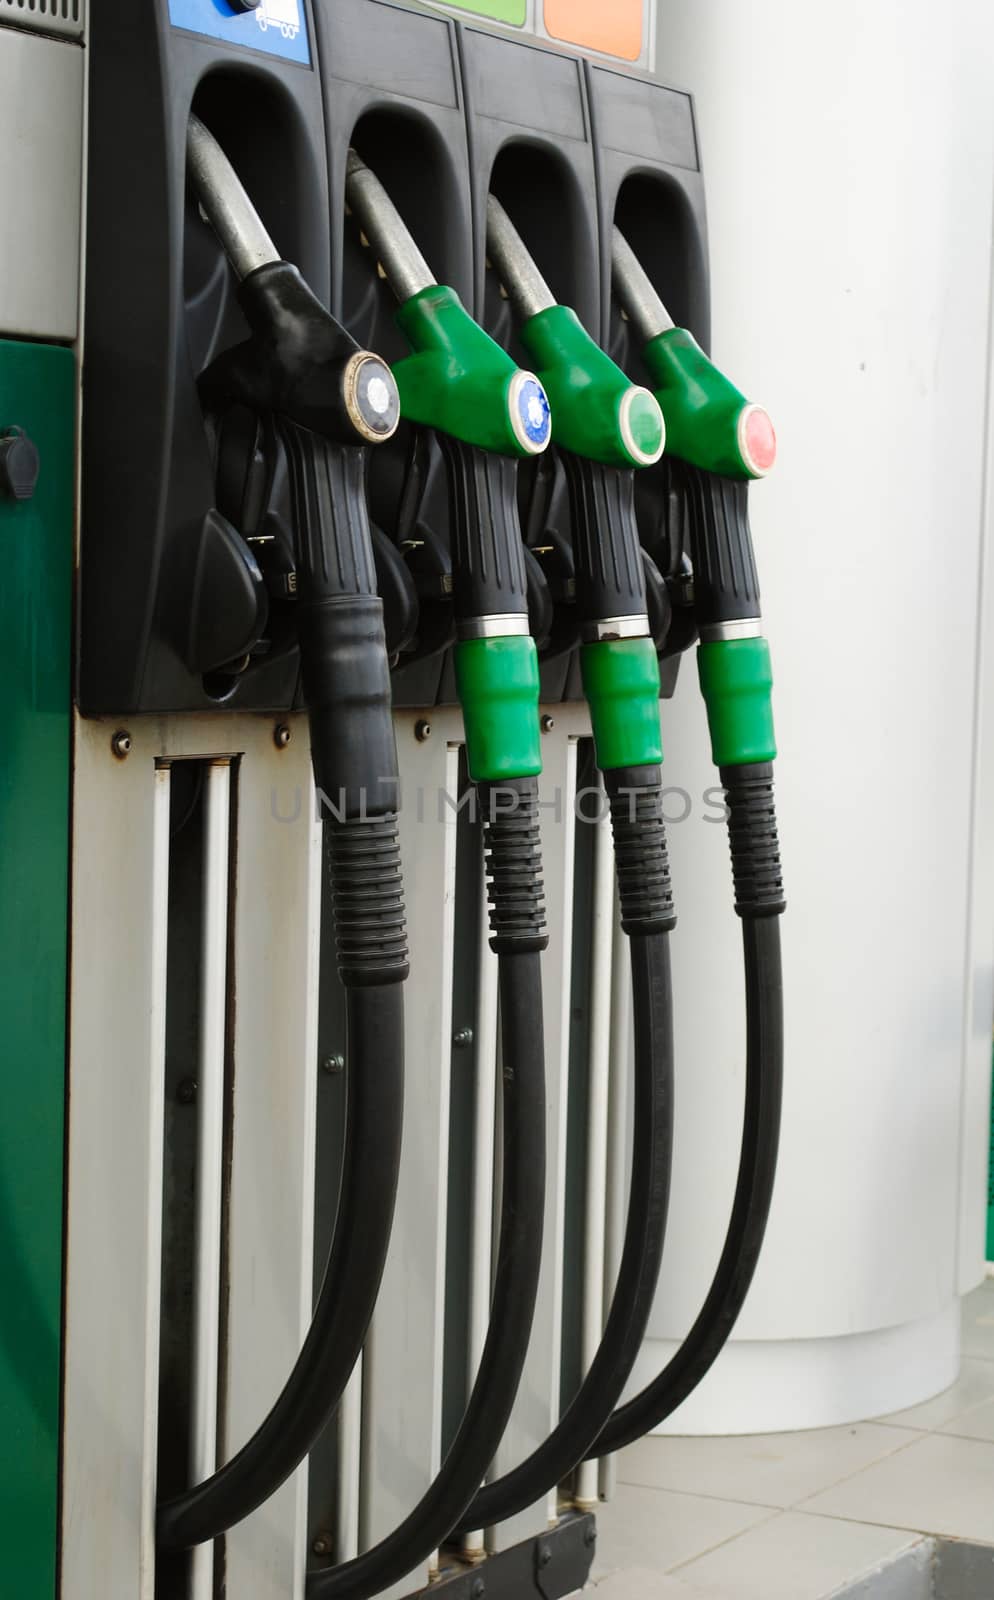 Gas station with three green handles and a black